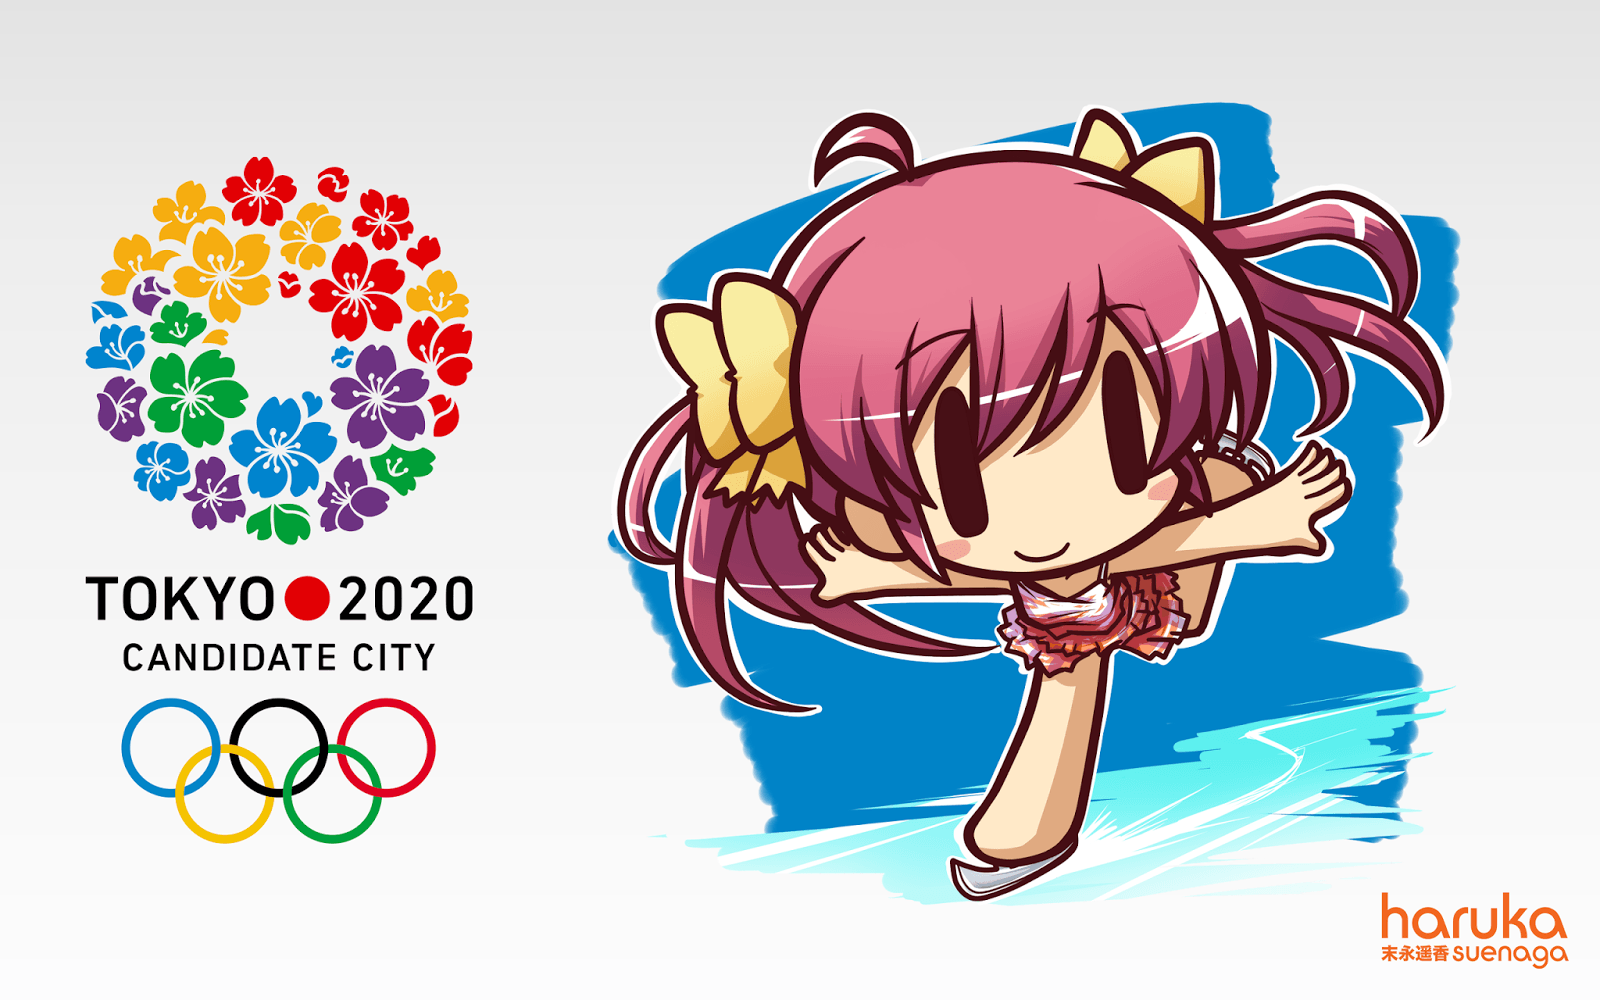 Brazil Olympic Games 2016: Tokyo 2020 collection wallpaper